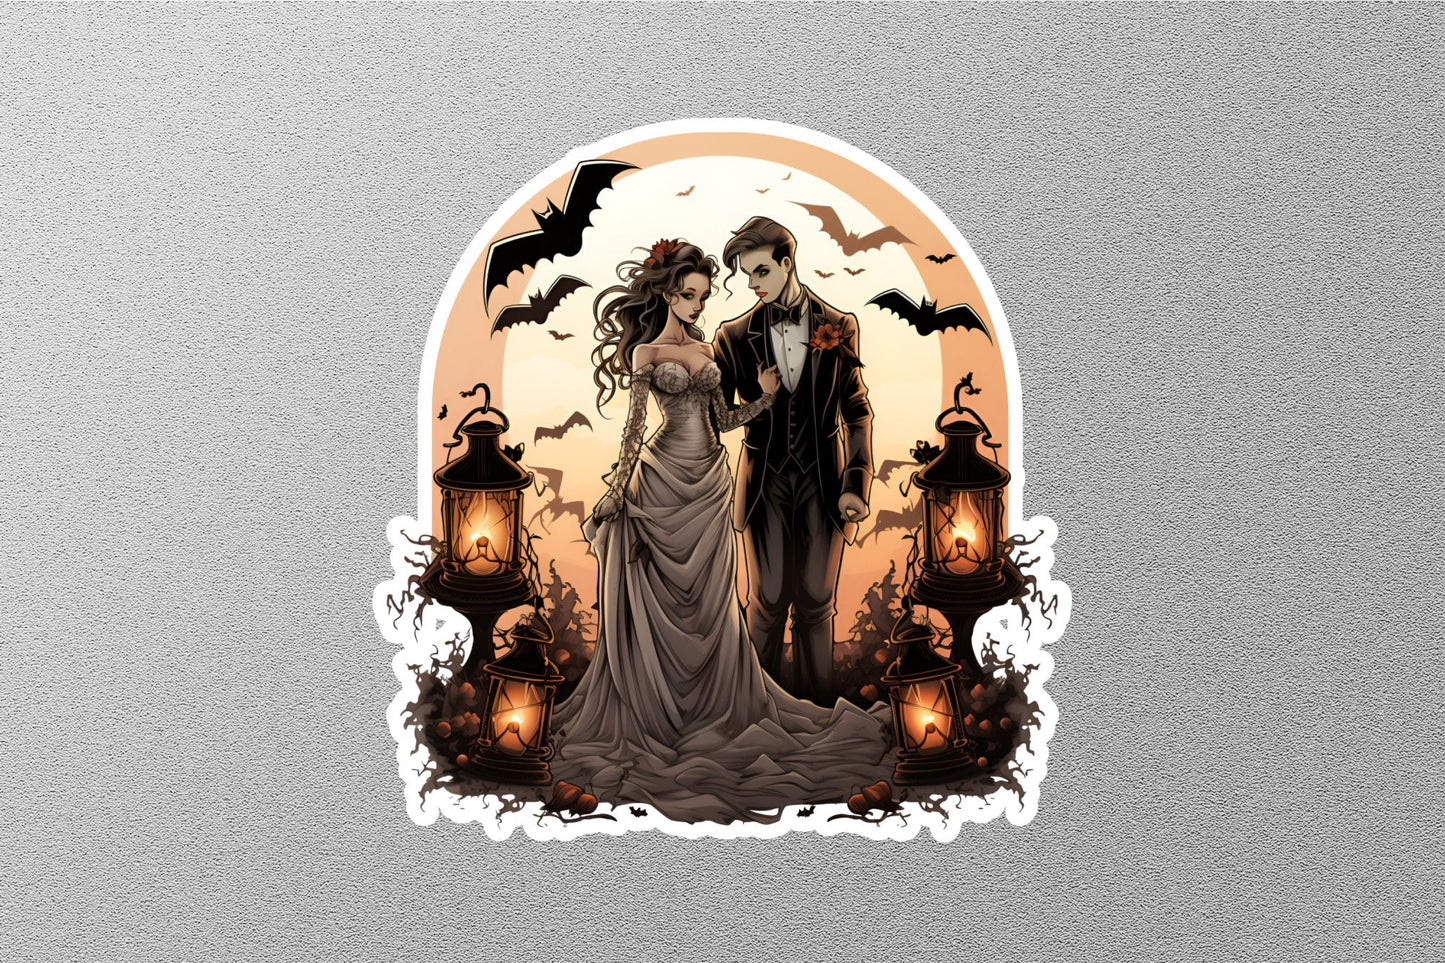 Newly Married Couples With Candles Halloween Sticker